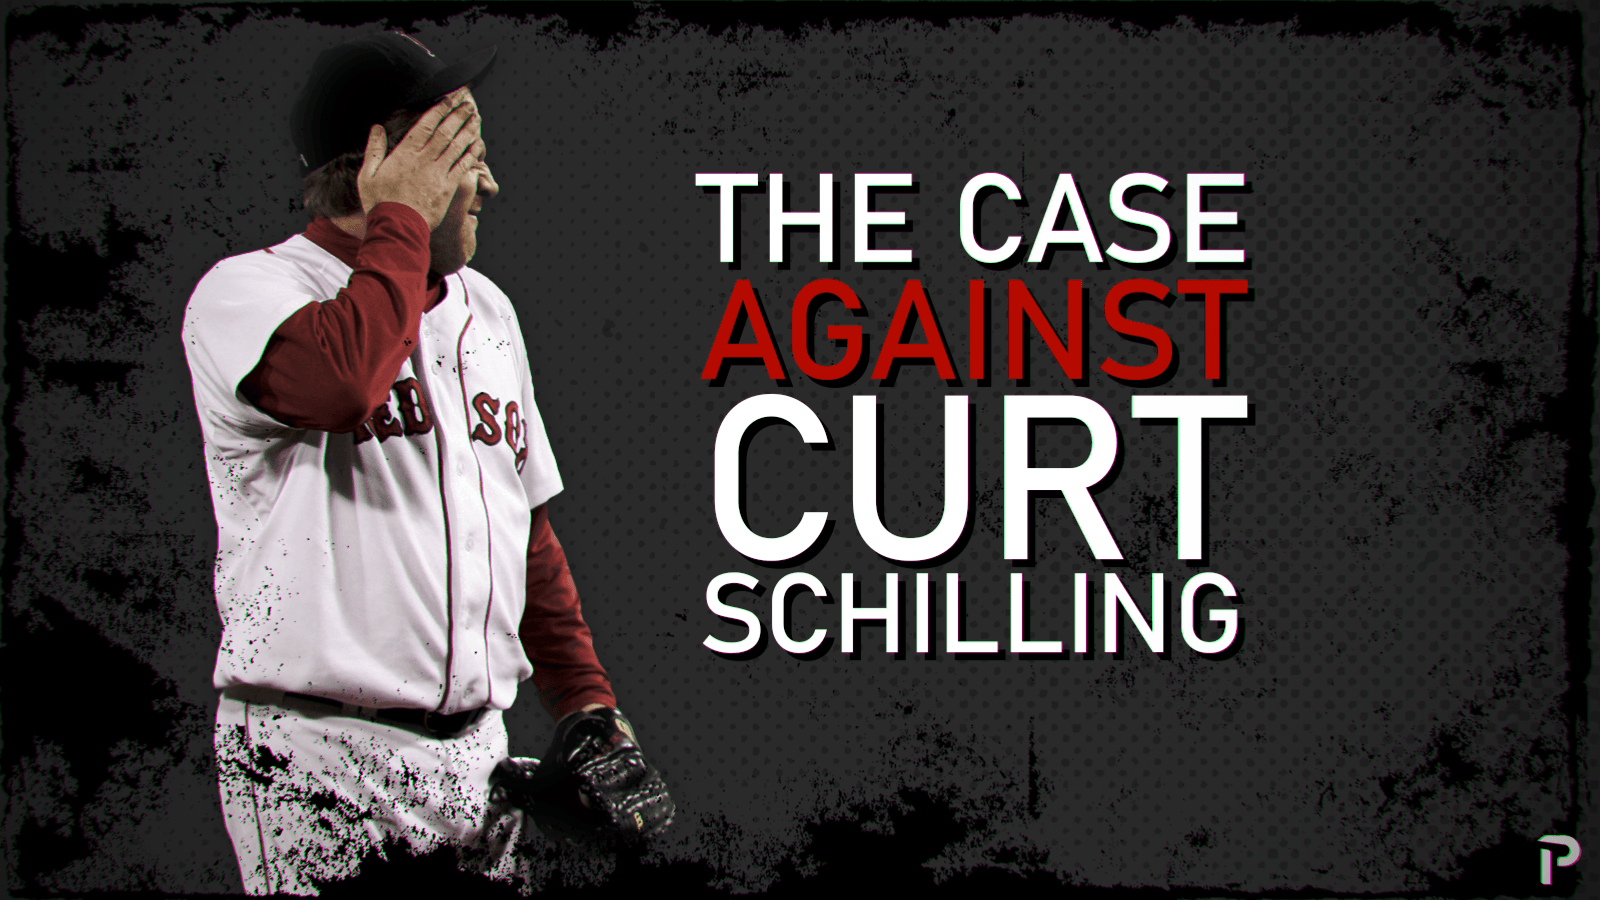 MLB: It's hard to feel sorry for Curt Schilling